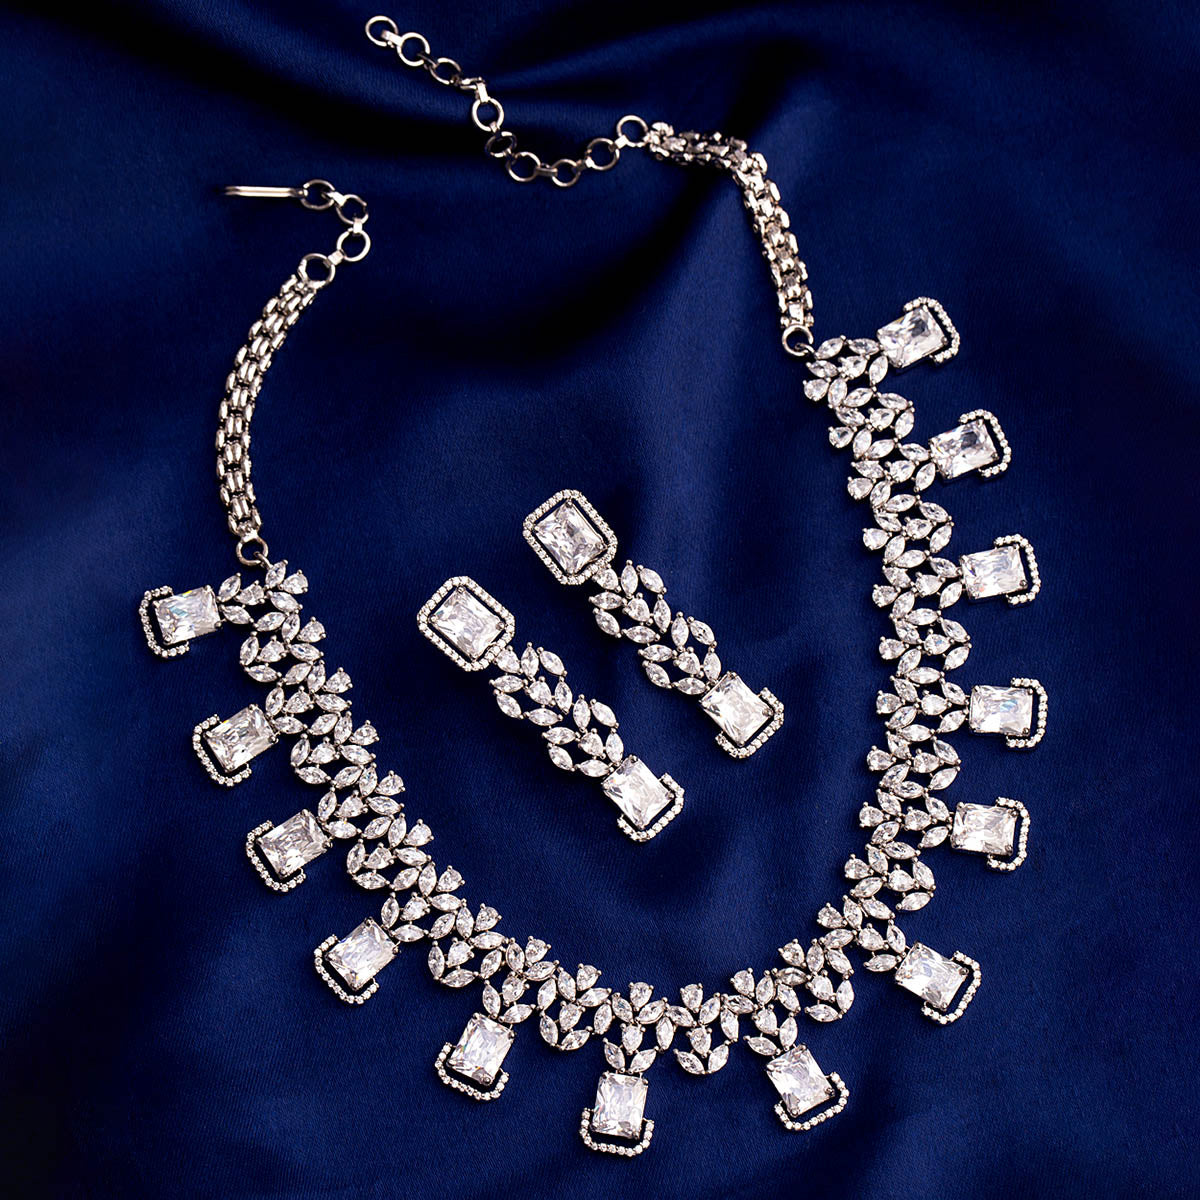 Victorian Jewelry Inspired Necklace Set